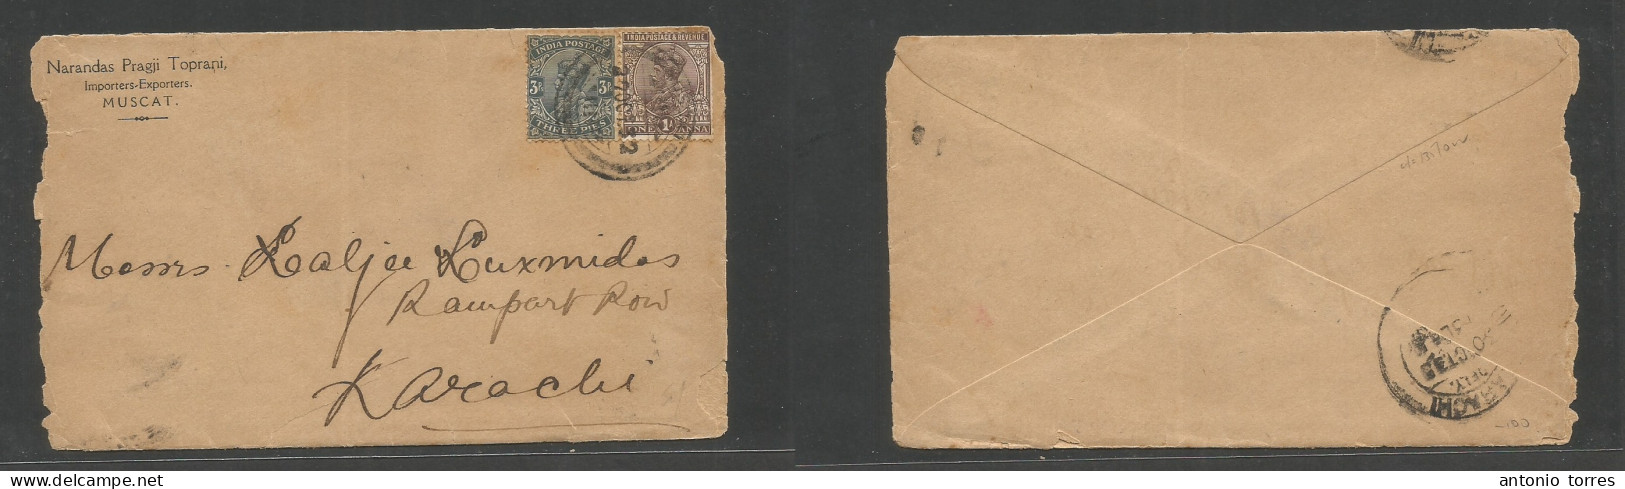 Oman. 1932 (27 Oct) Indian Used In Muscat - Karachi, Pakistan (30 Oct) Comercial Multifkd Env At 3p 1a Rate Cds. Fine Na - Oman